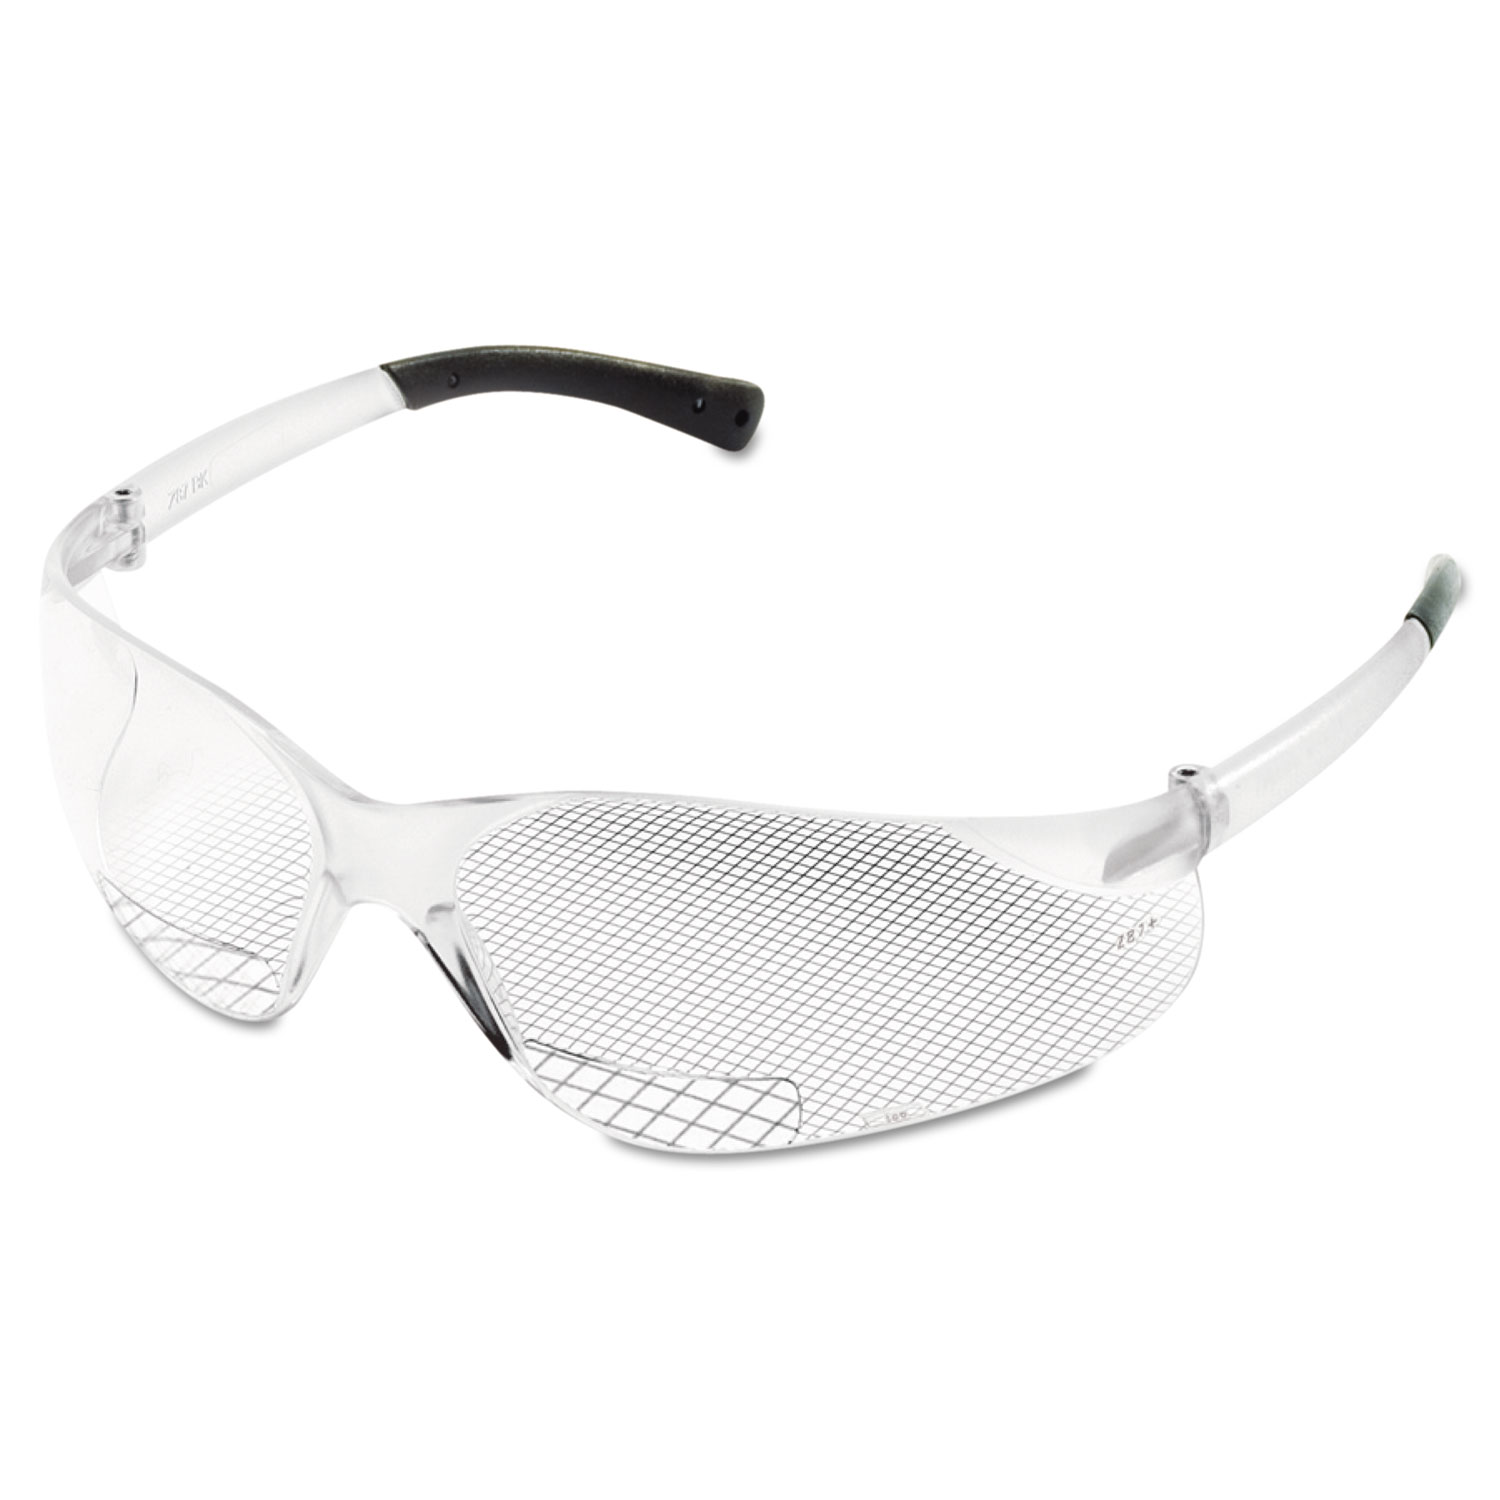 Bearkat Magnifier Protective Eyewear, Clear, 2.5 Diopter